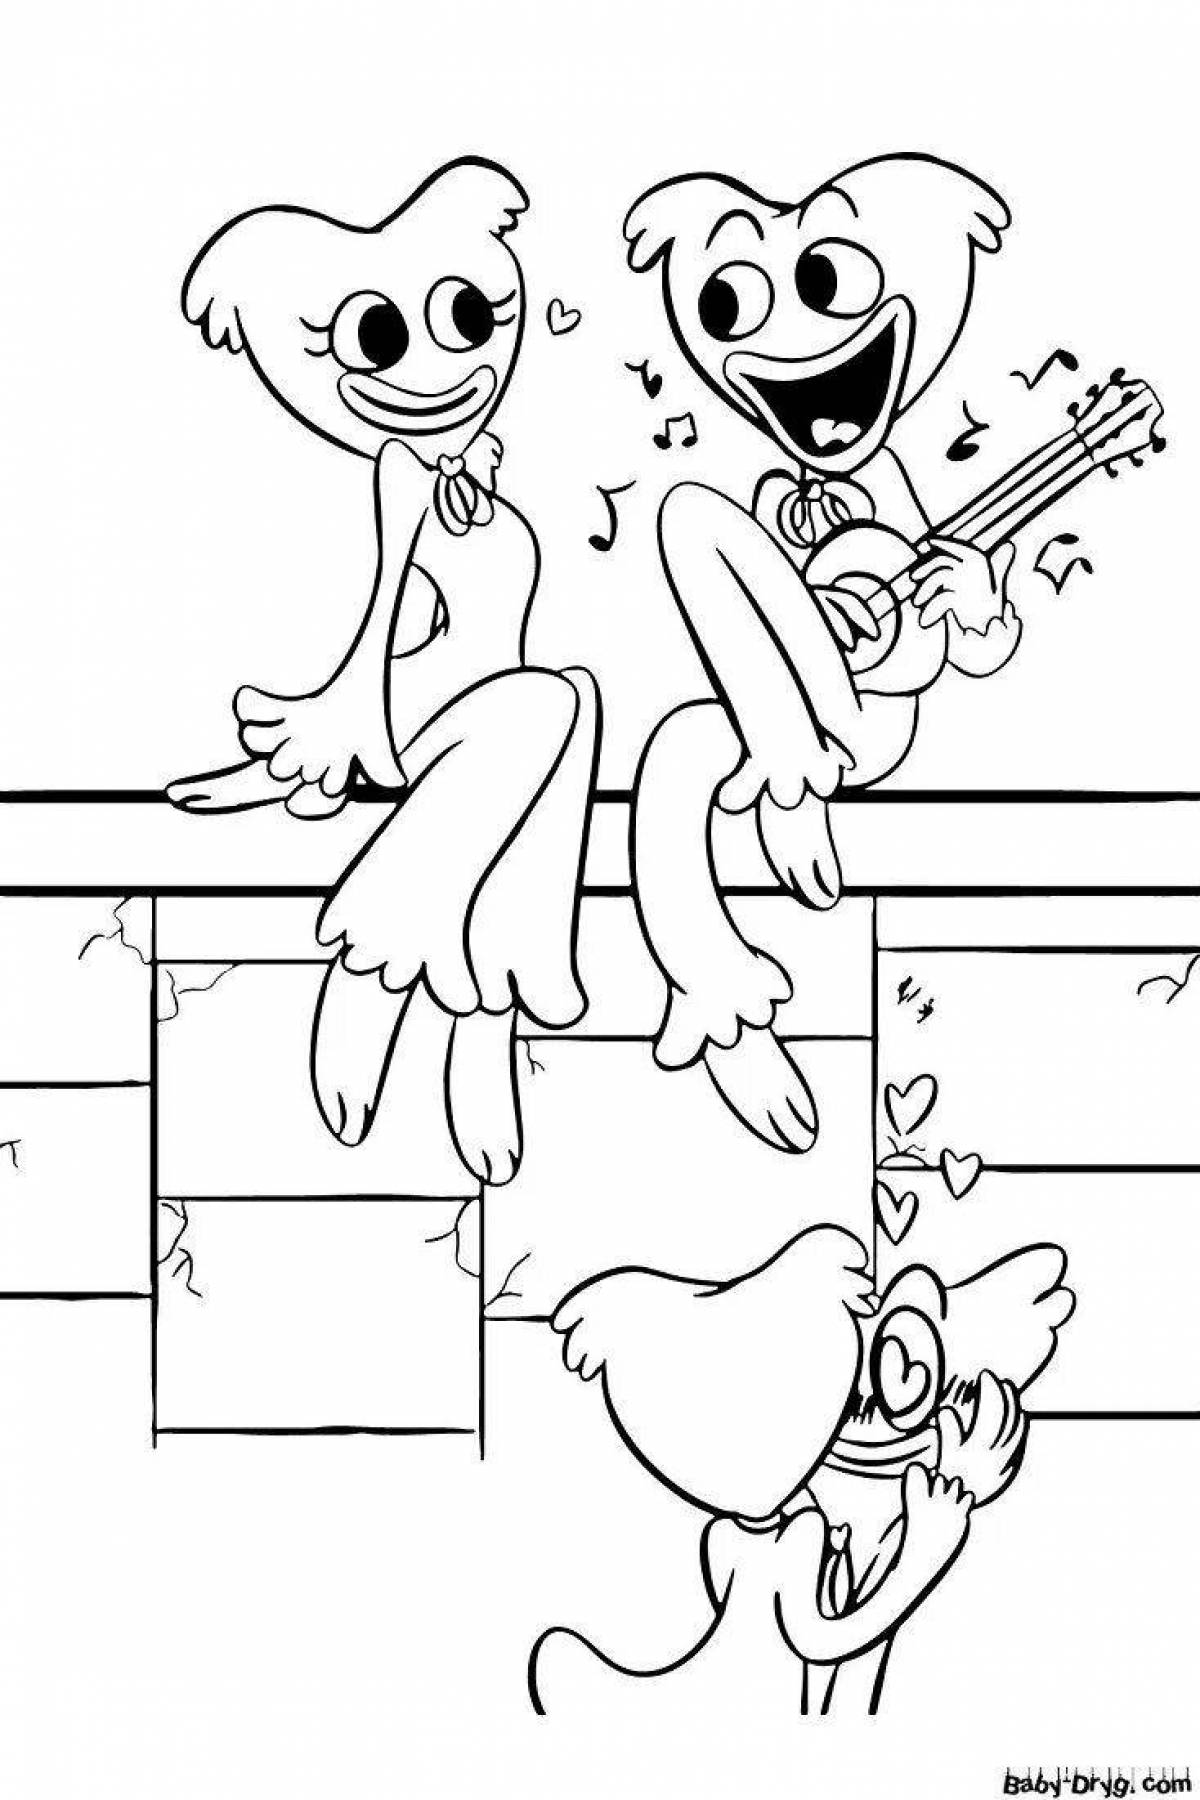 Huggy waggi and kisi misi playful coloring page